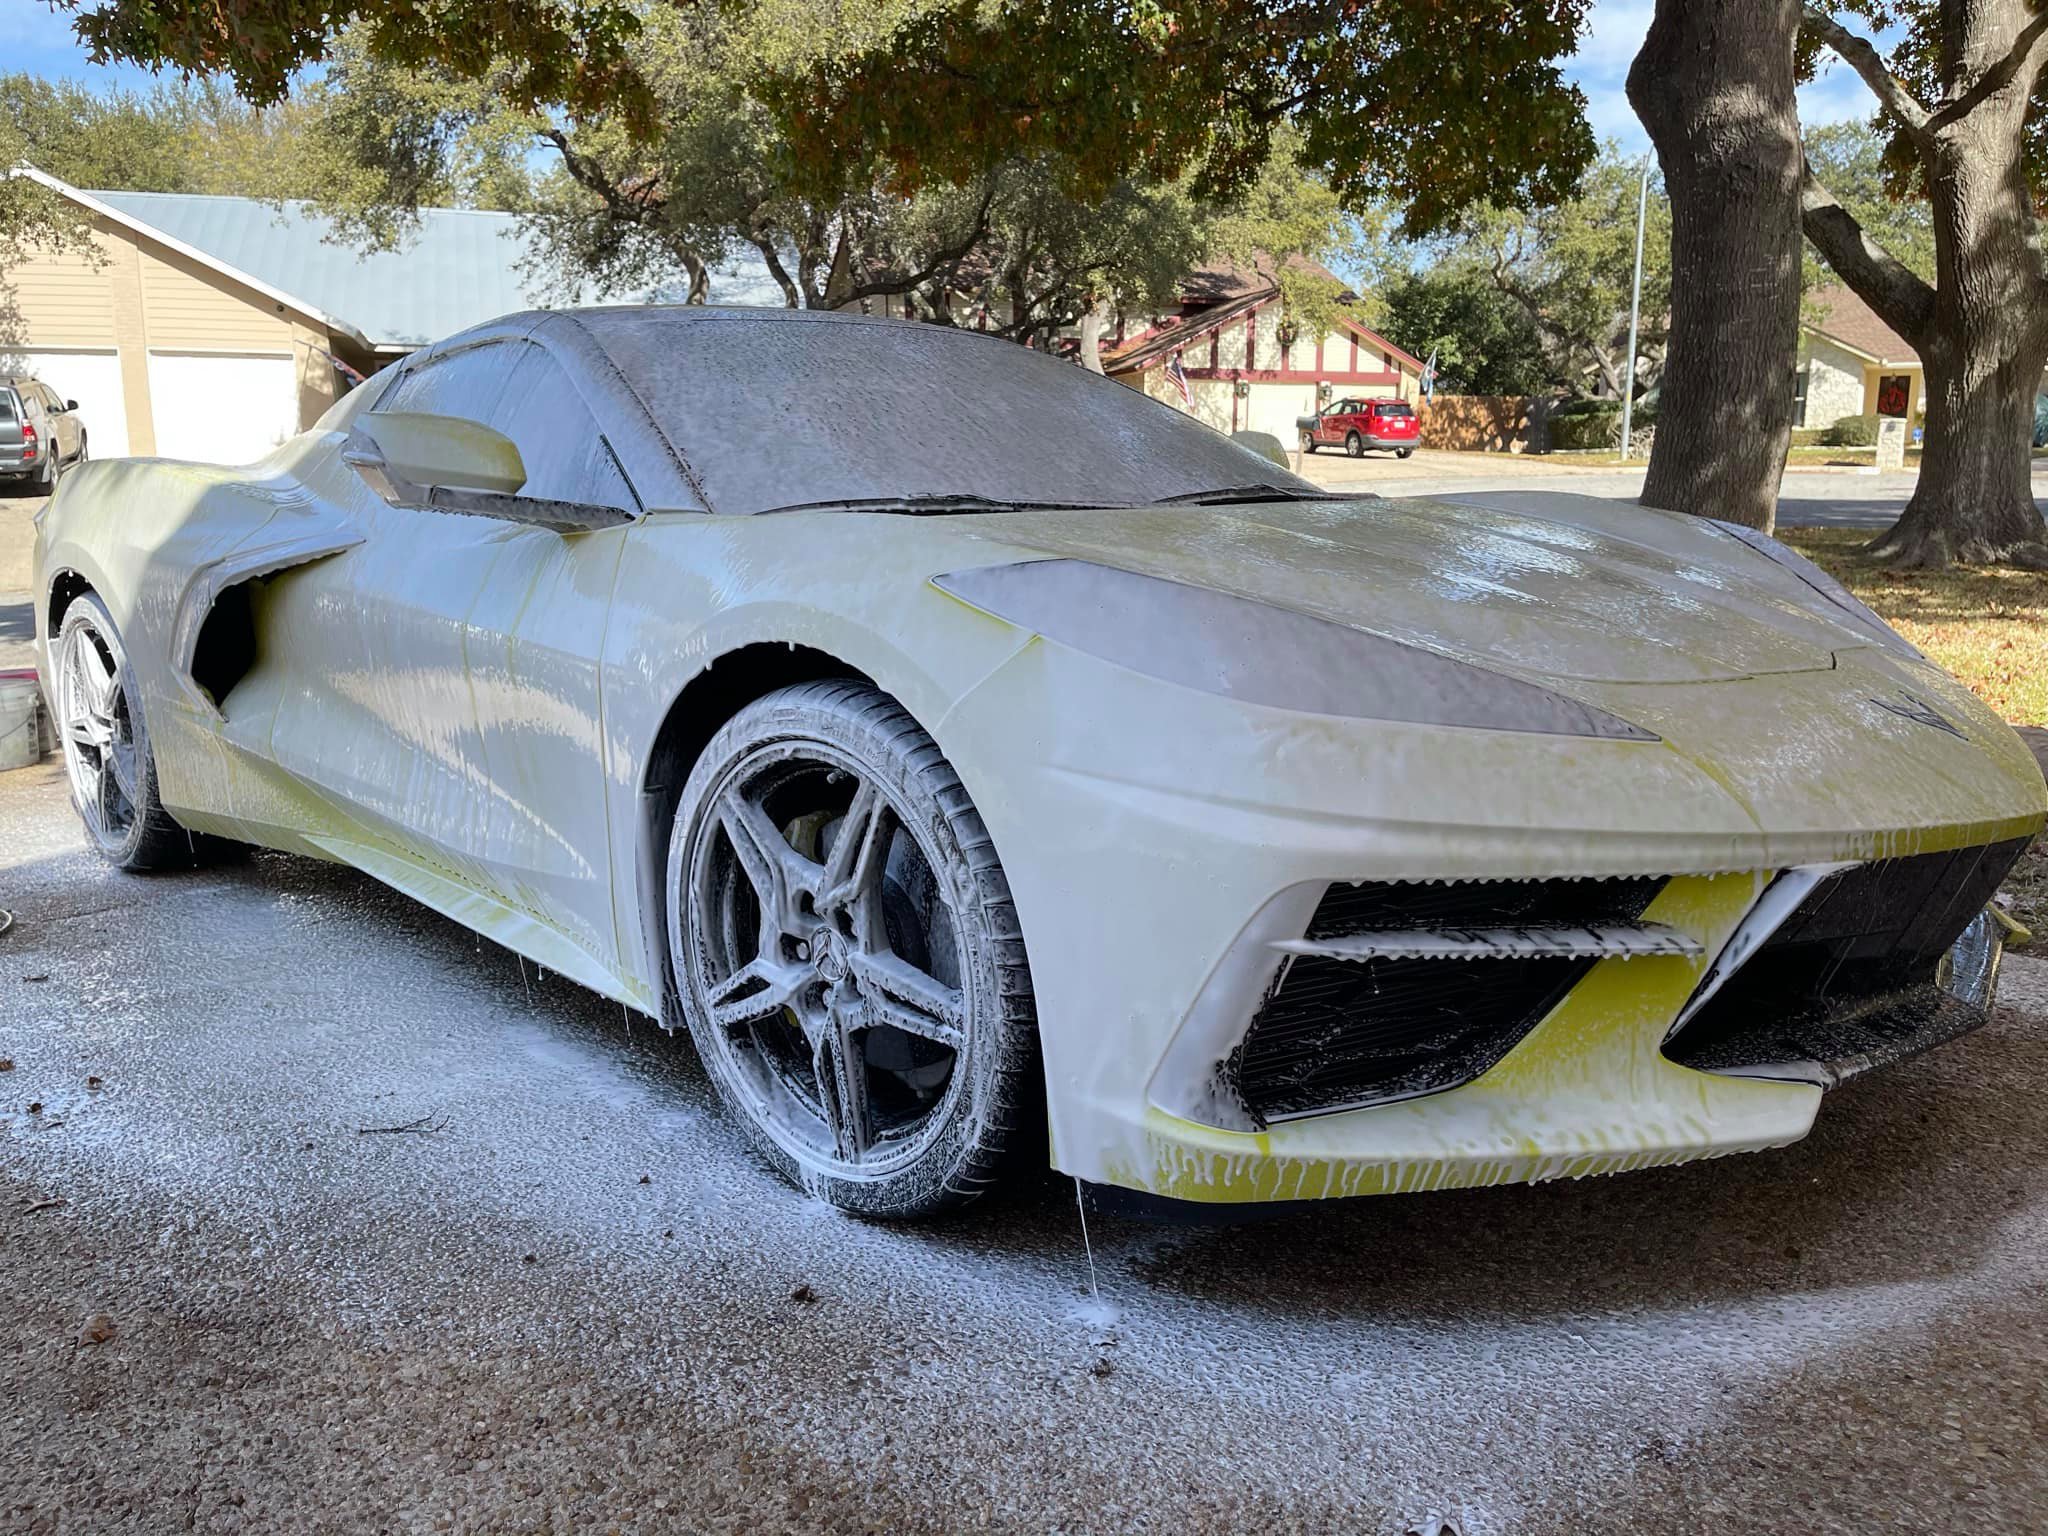 Galaxy Auto Detailing & Mobile Detailing is Providing a High-Quality Services For All Types of Vehicles in San Antonio, TX